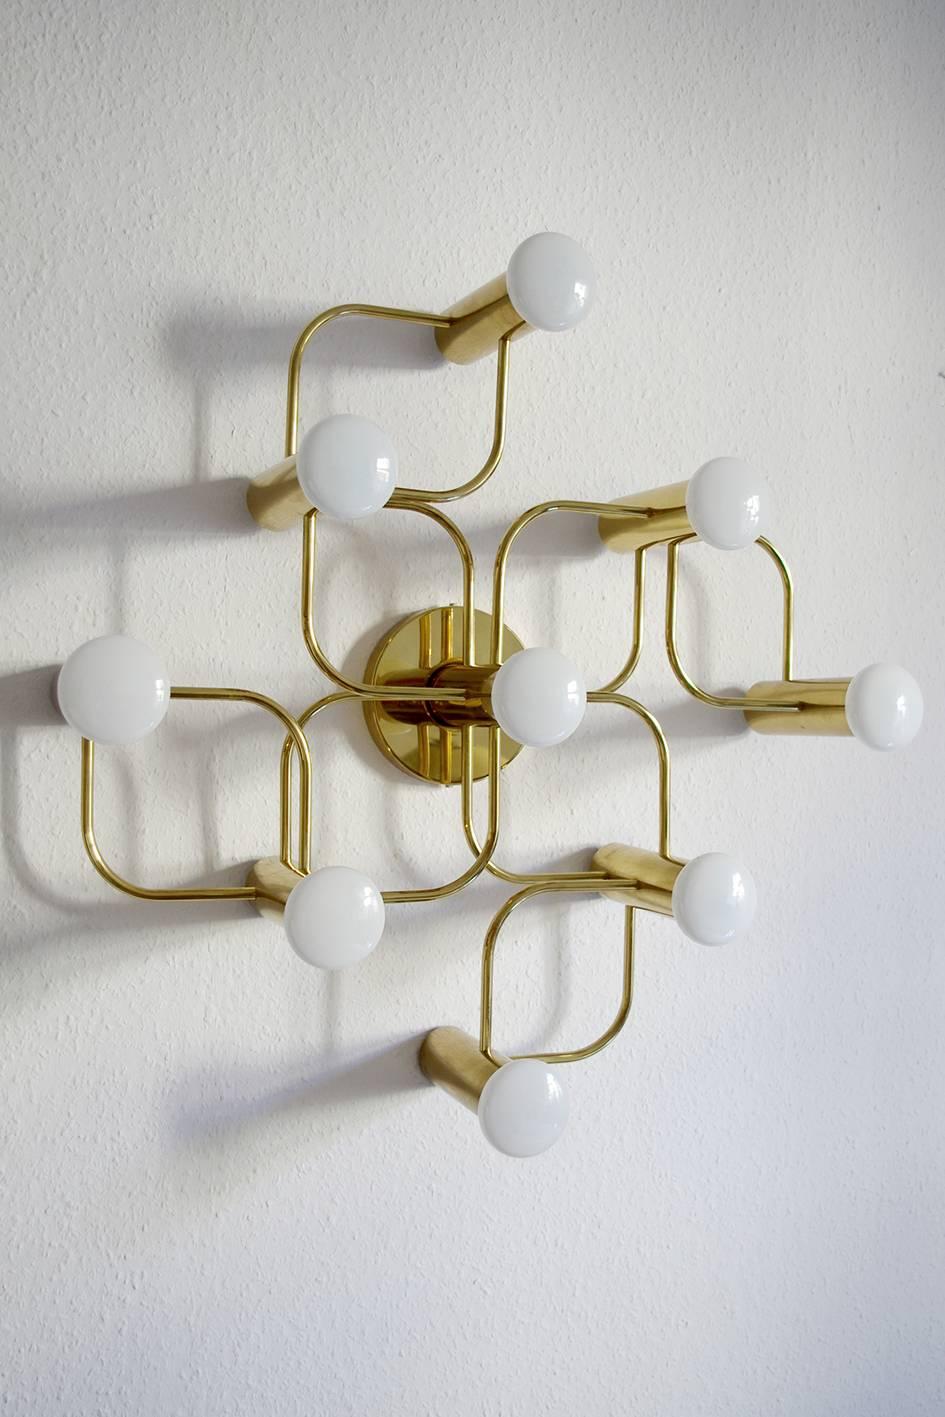 German Pair of Sculptural Ceiling or Wall Flushmounts Chandeliers by Leola, 1960s